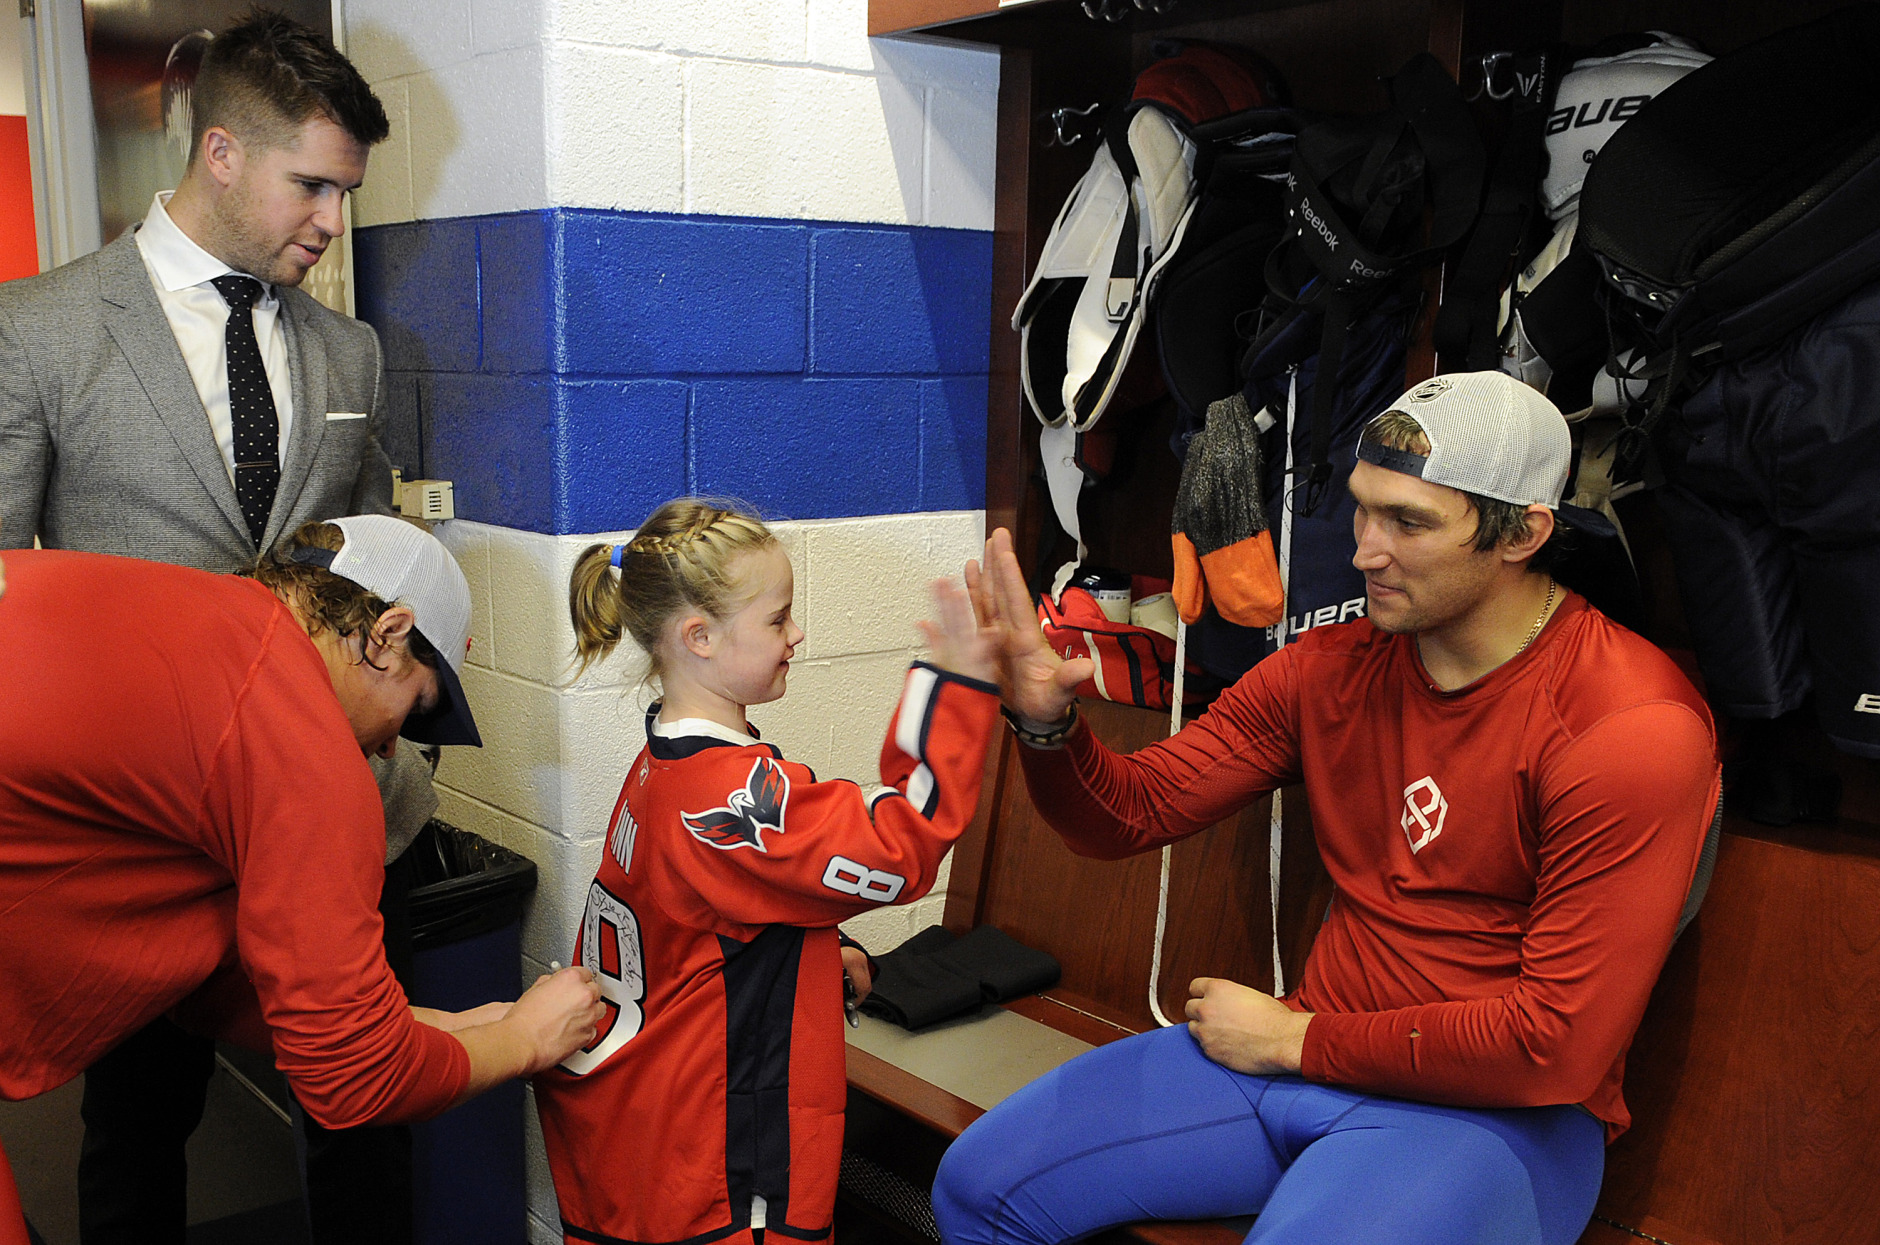 Early birthday present: Alex Ovechkin skates with three-year-old Caps fan  after practice